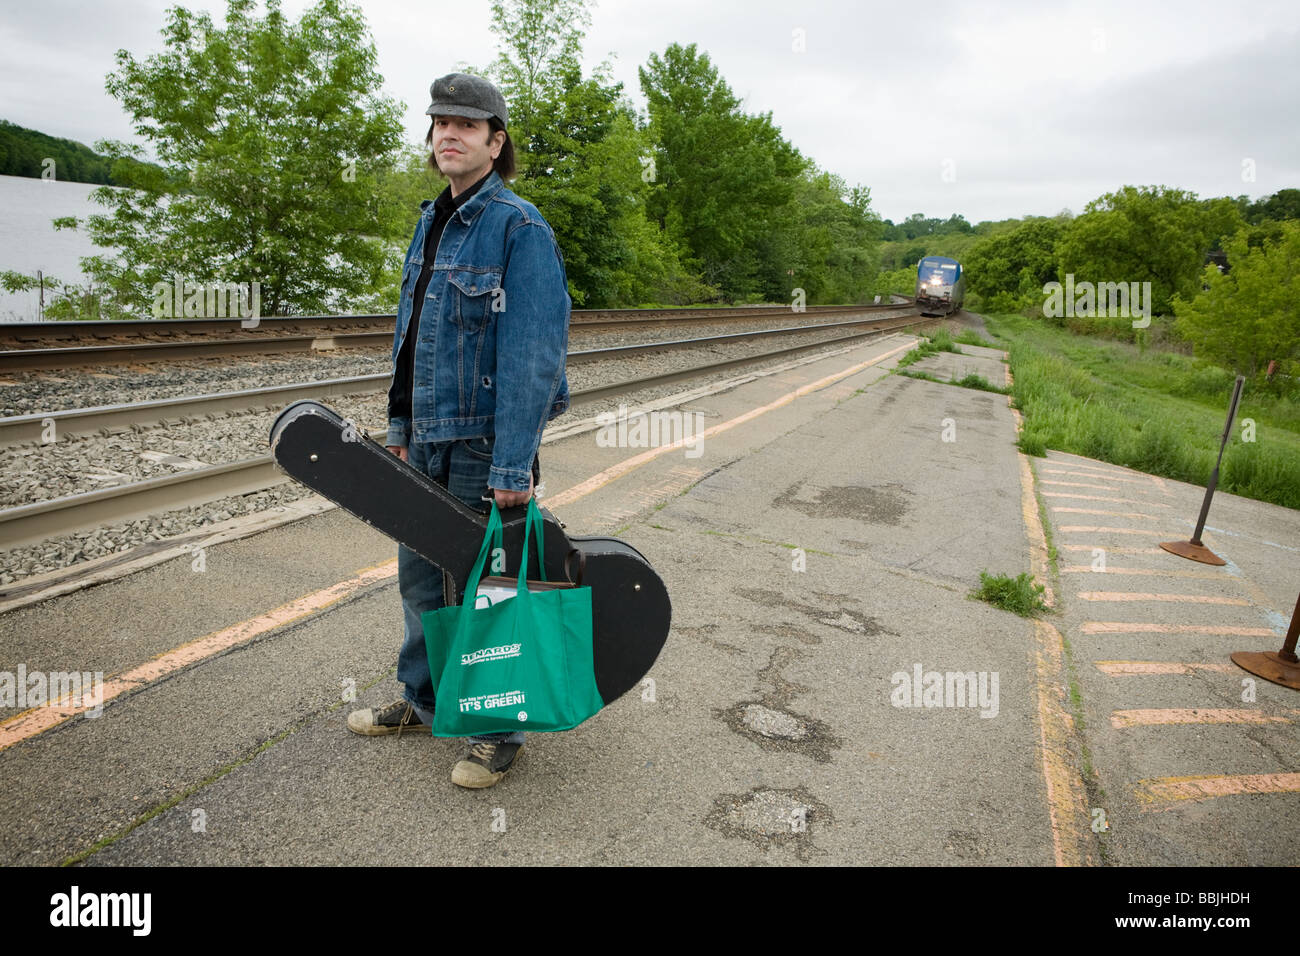 Musician Grant Hart formerly of seminal indy rock band Husker Du catching a train Amsterdam New York Stock Photo